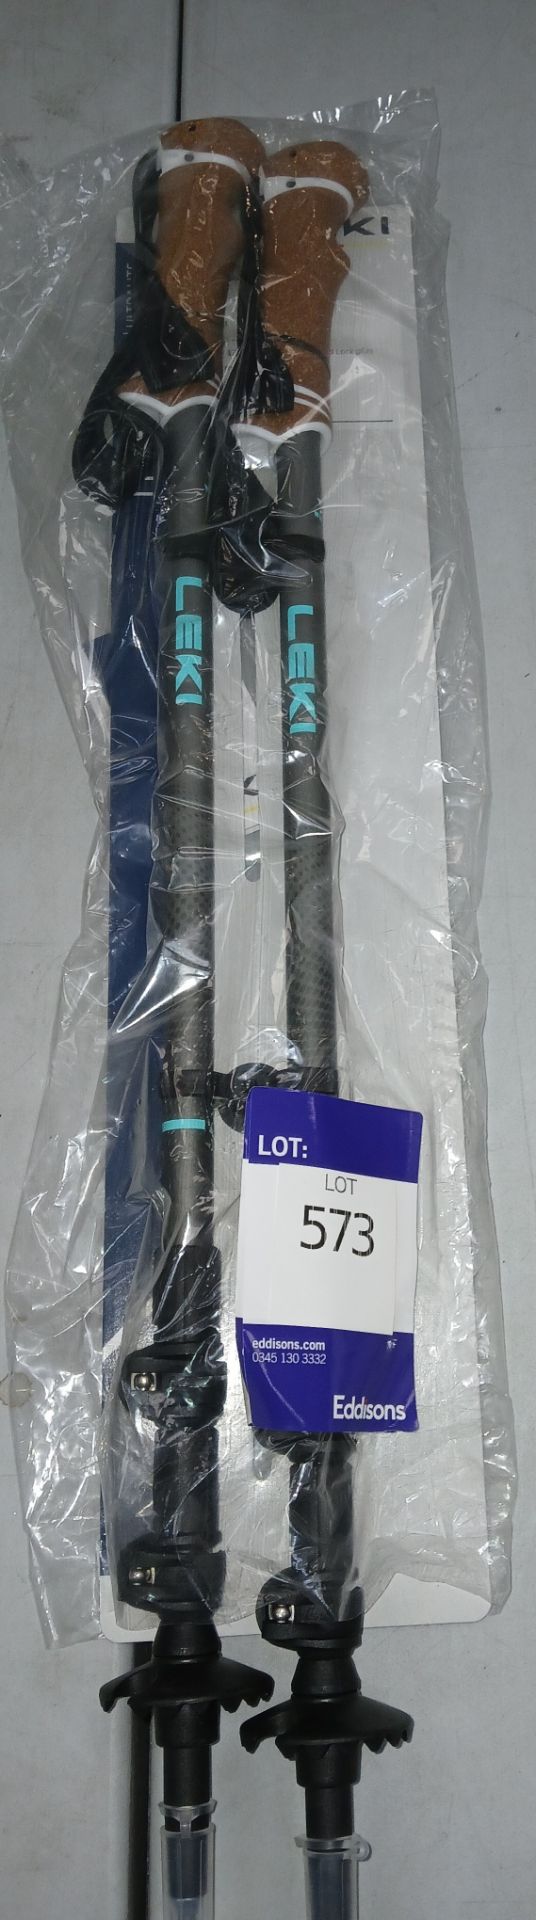 Pair of Lekki Trekking Poles (Please note, Viewing Strongly Recommended - Eddisons have not